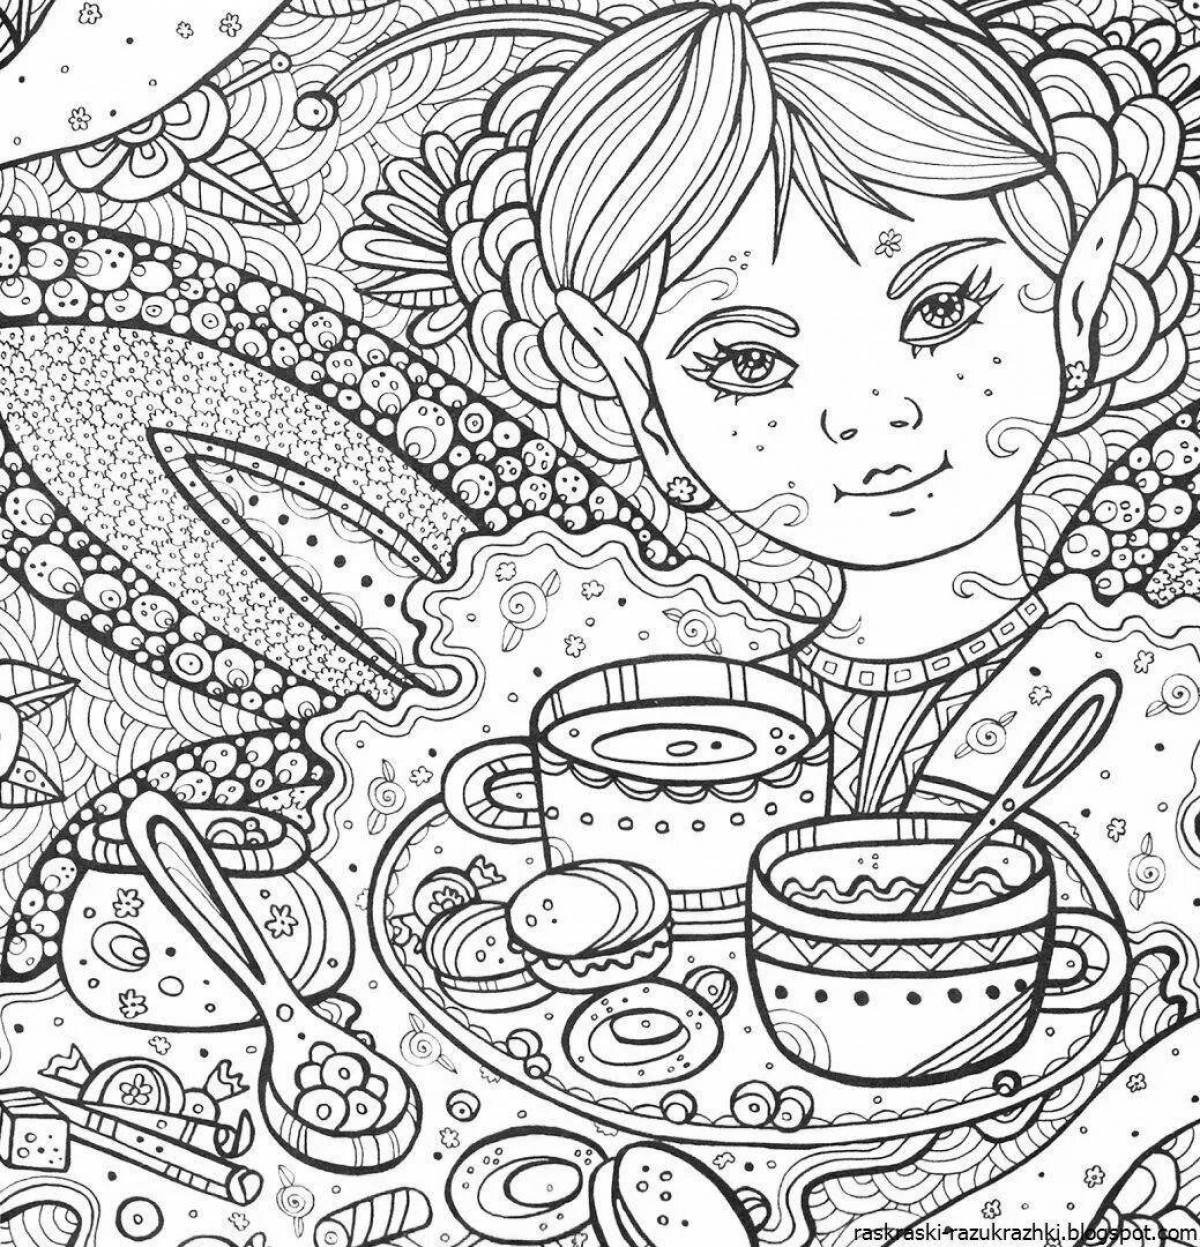 Relaxing anti-stress coloring book for children 10 years old